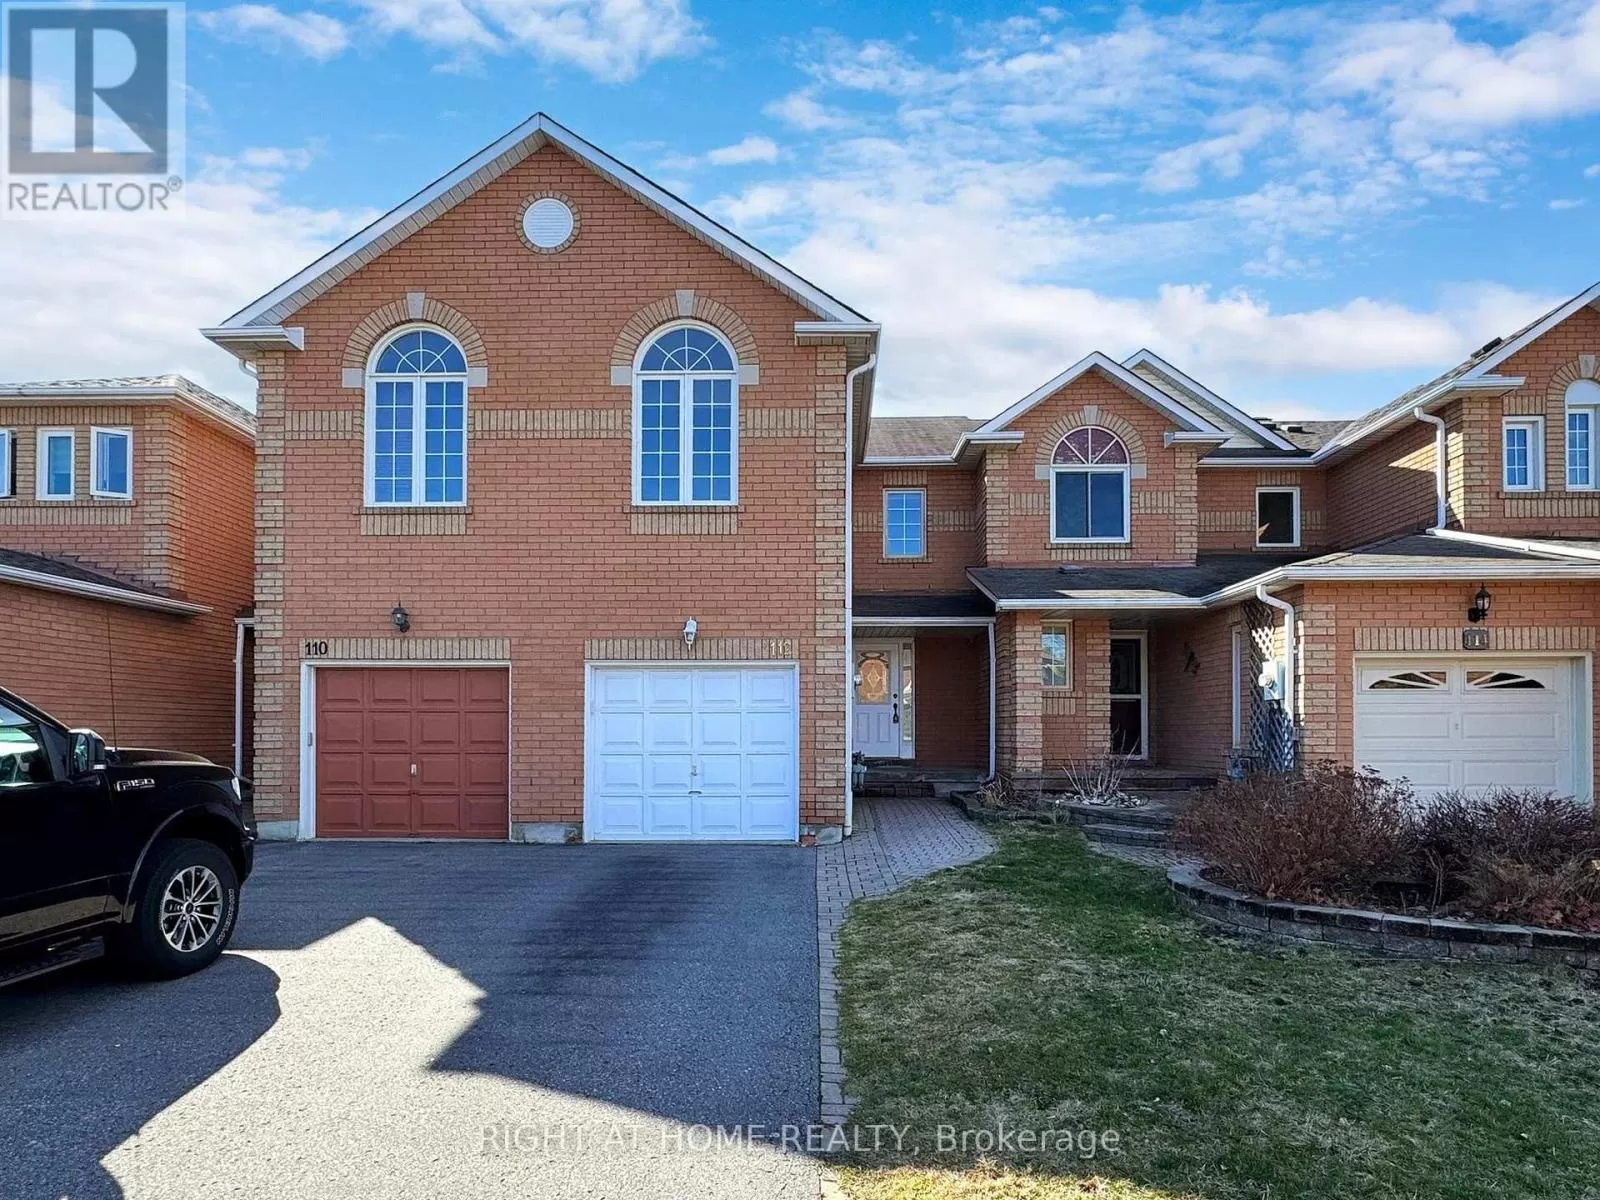 Row / Townhouse for rent: 112 Creekwood Cres, Whitby, Ontario L1R 2K4